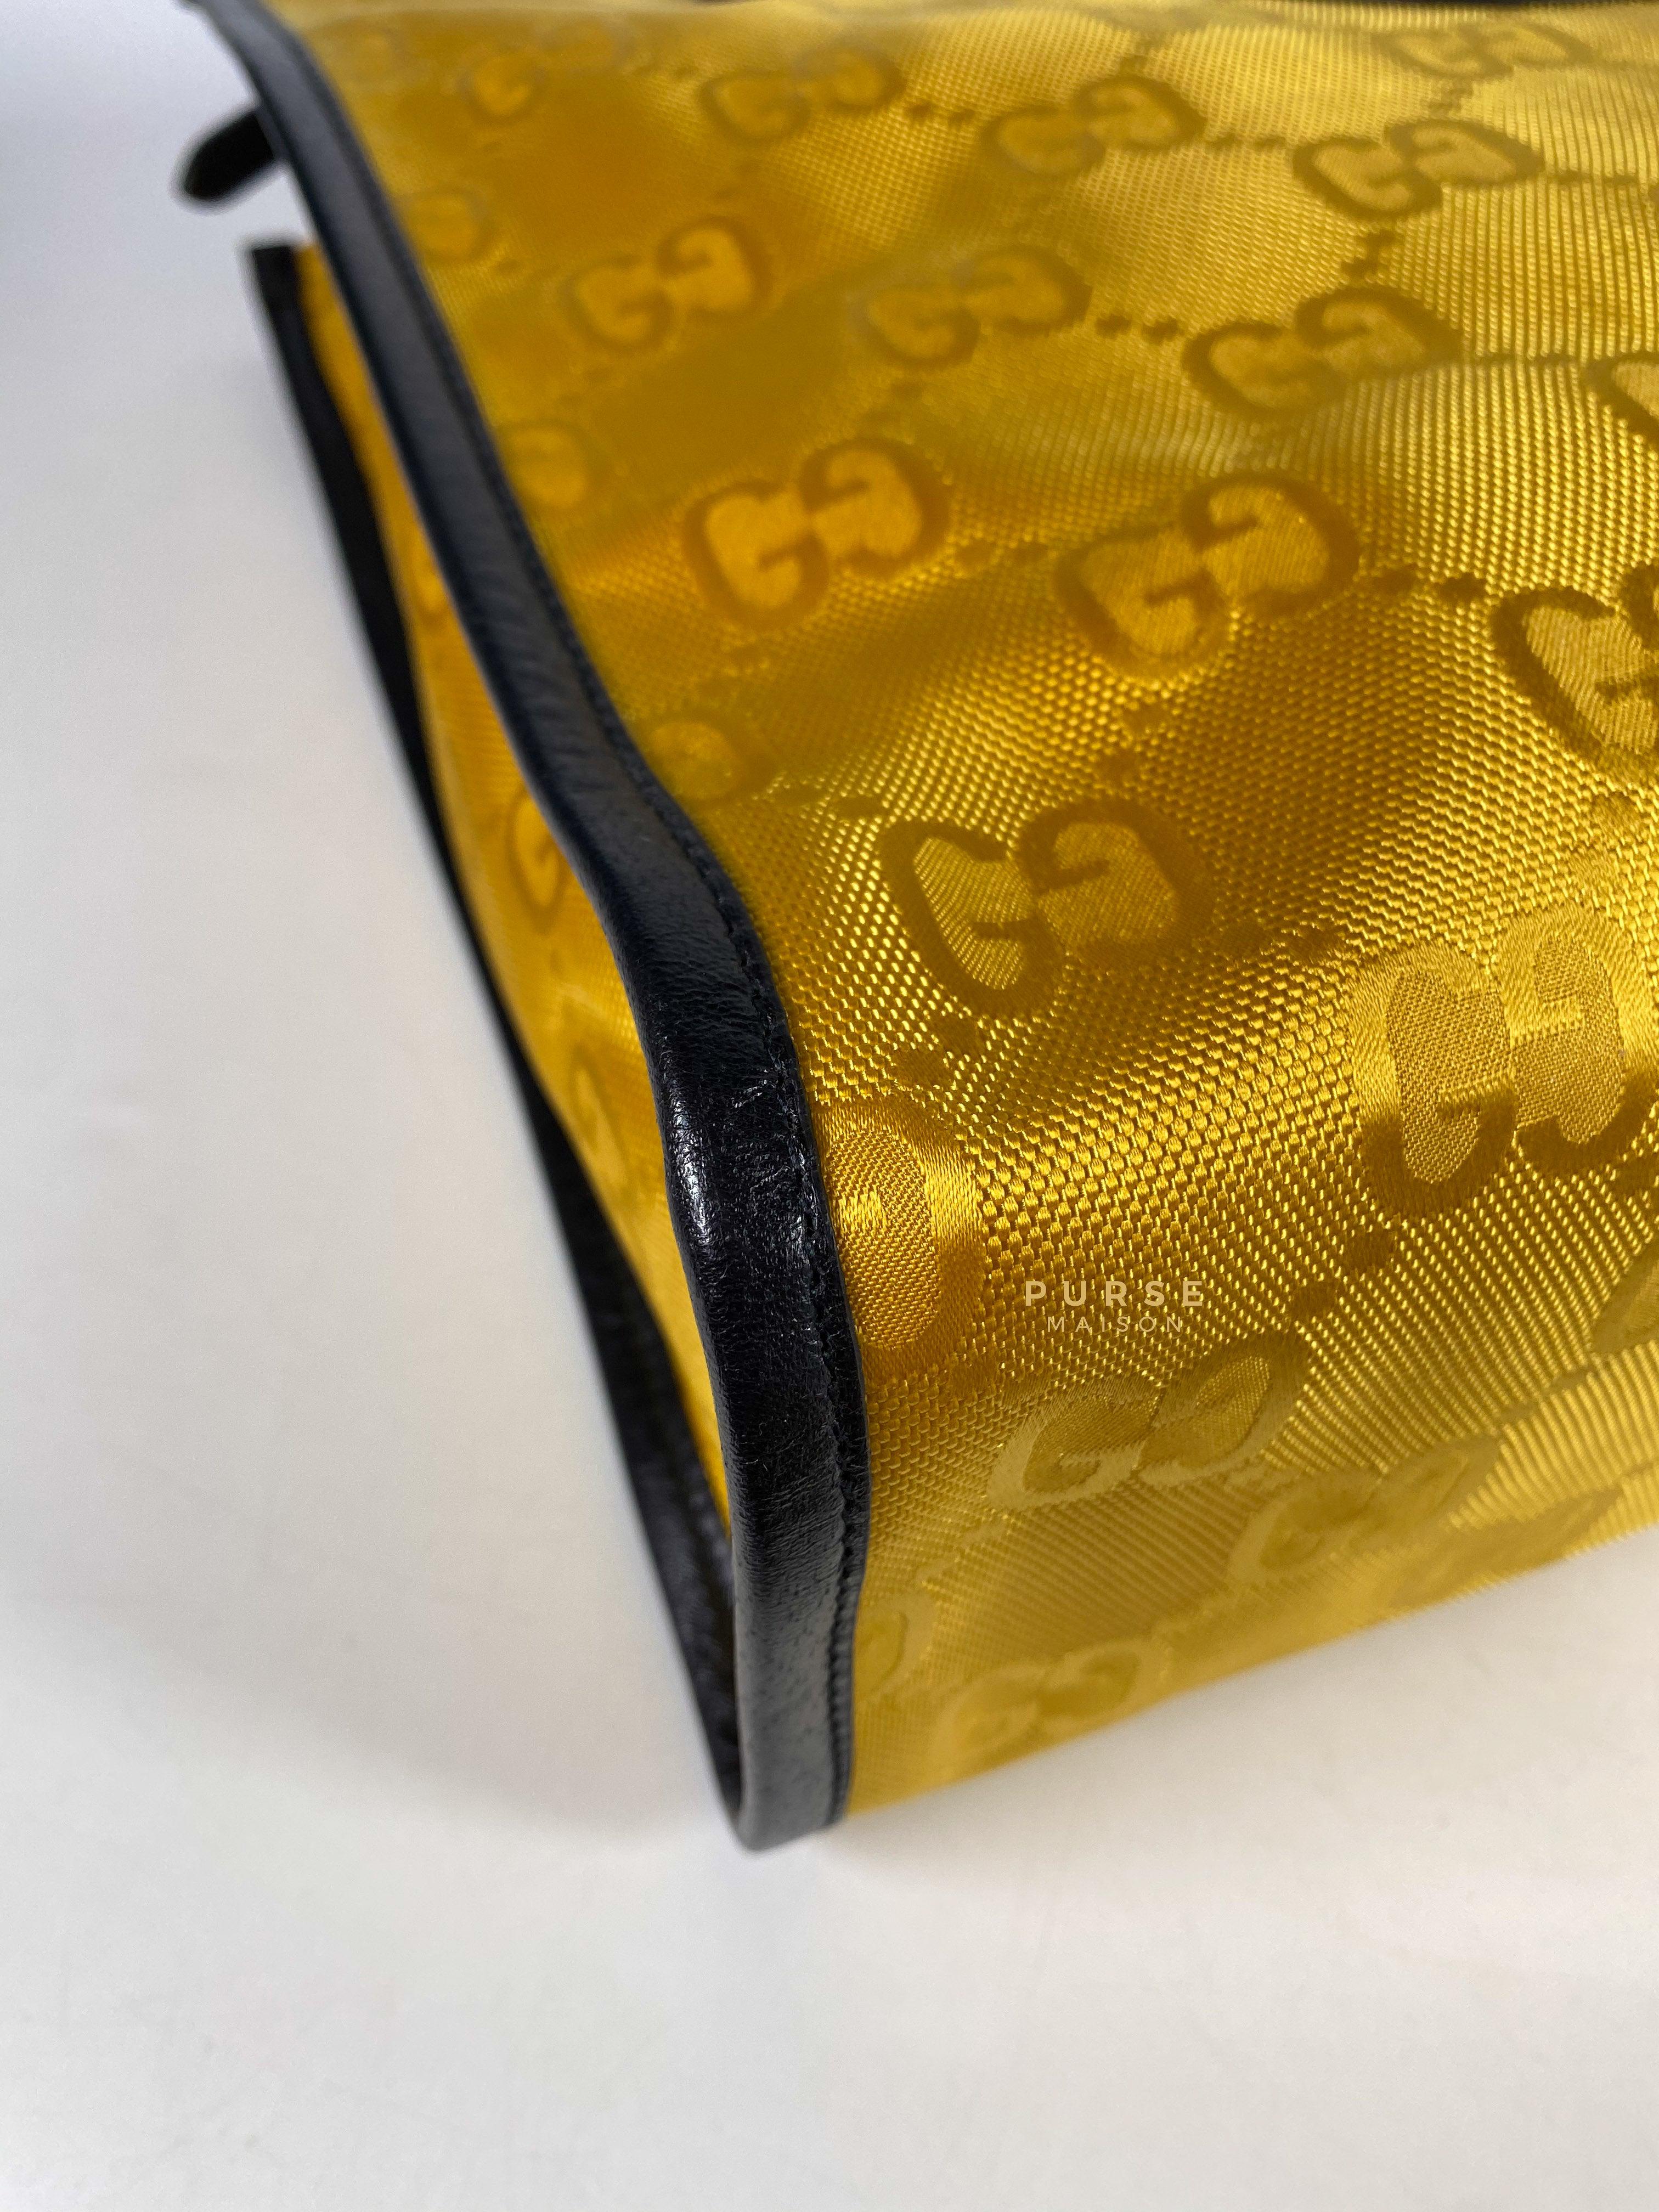 Gucci Off the Grid Yellow Long Tote Bag | Purse Maison Luxury Bags Shop